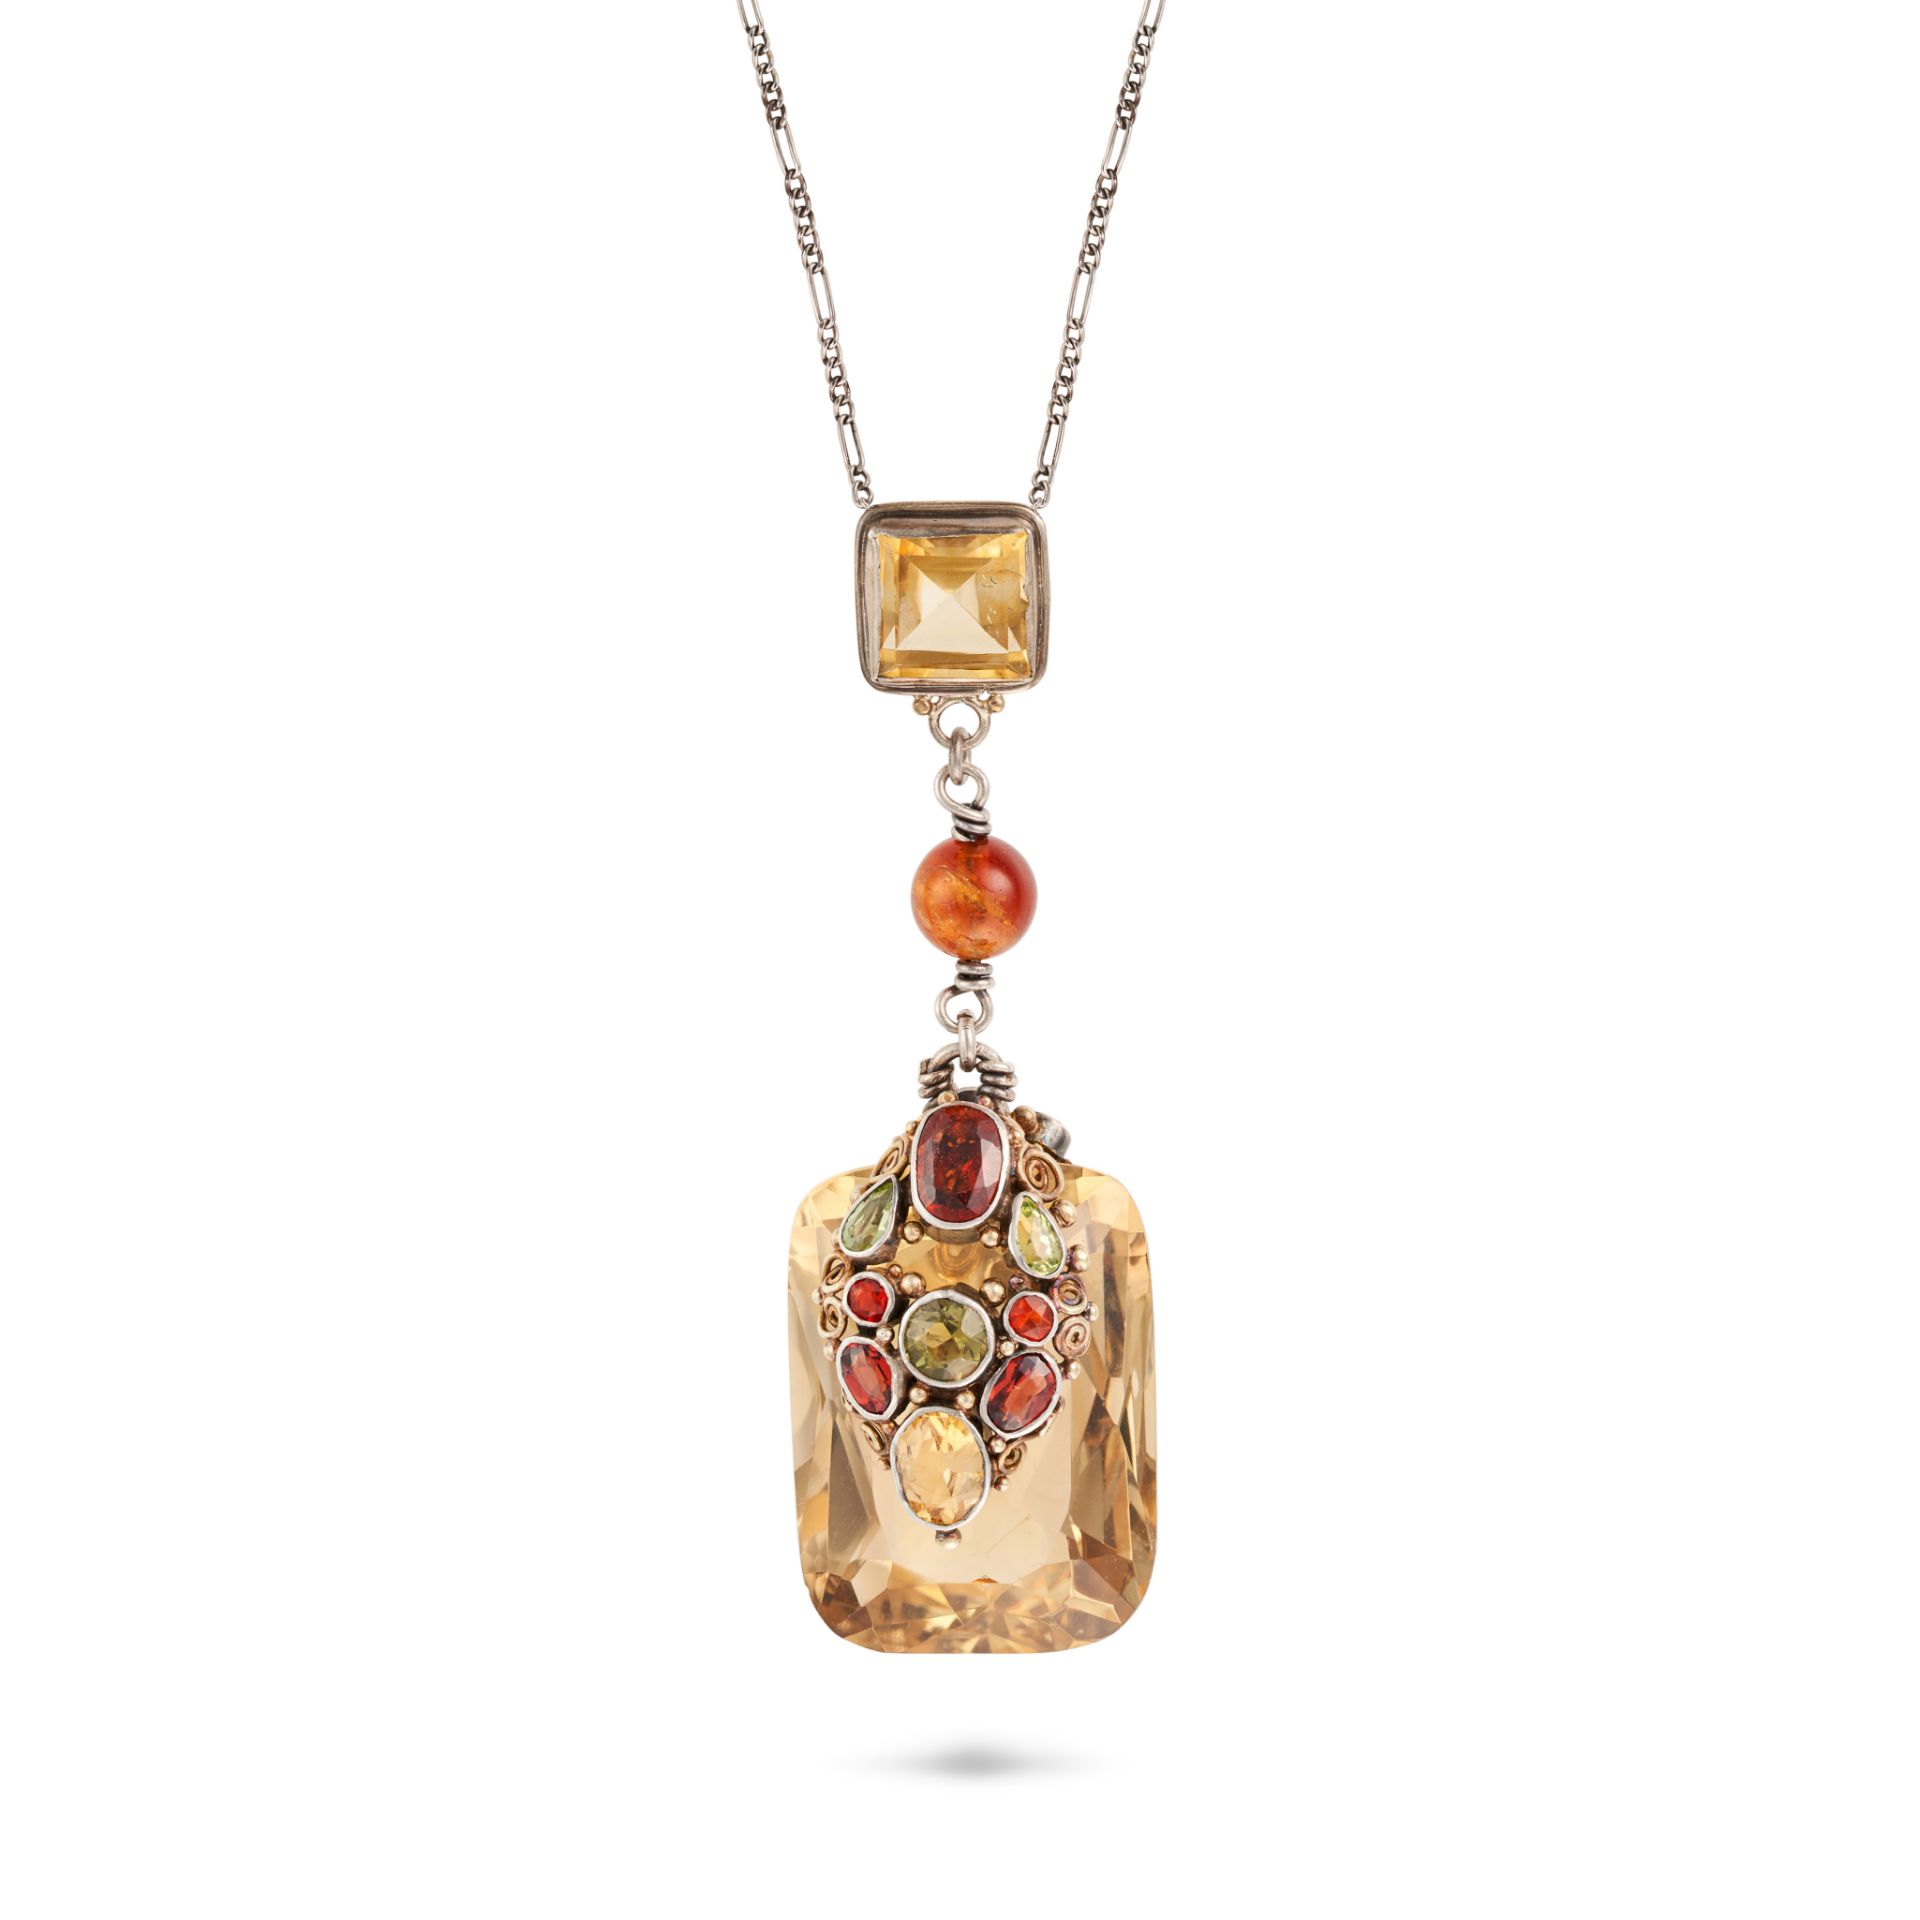 ATTR DORRIE NOSSITER, AN ARTS AND CRAFTS CITRINE, AMBER, HESSONITE GARNET AND PERIDOT PENDANT NEC...